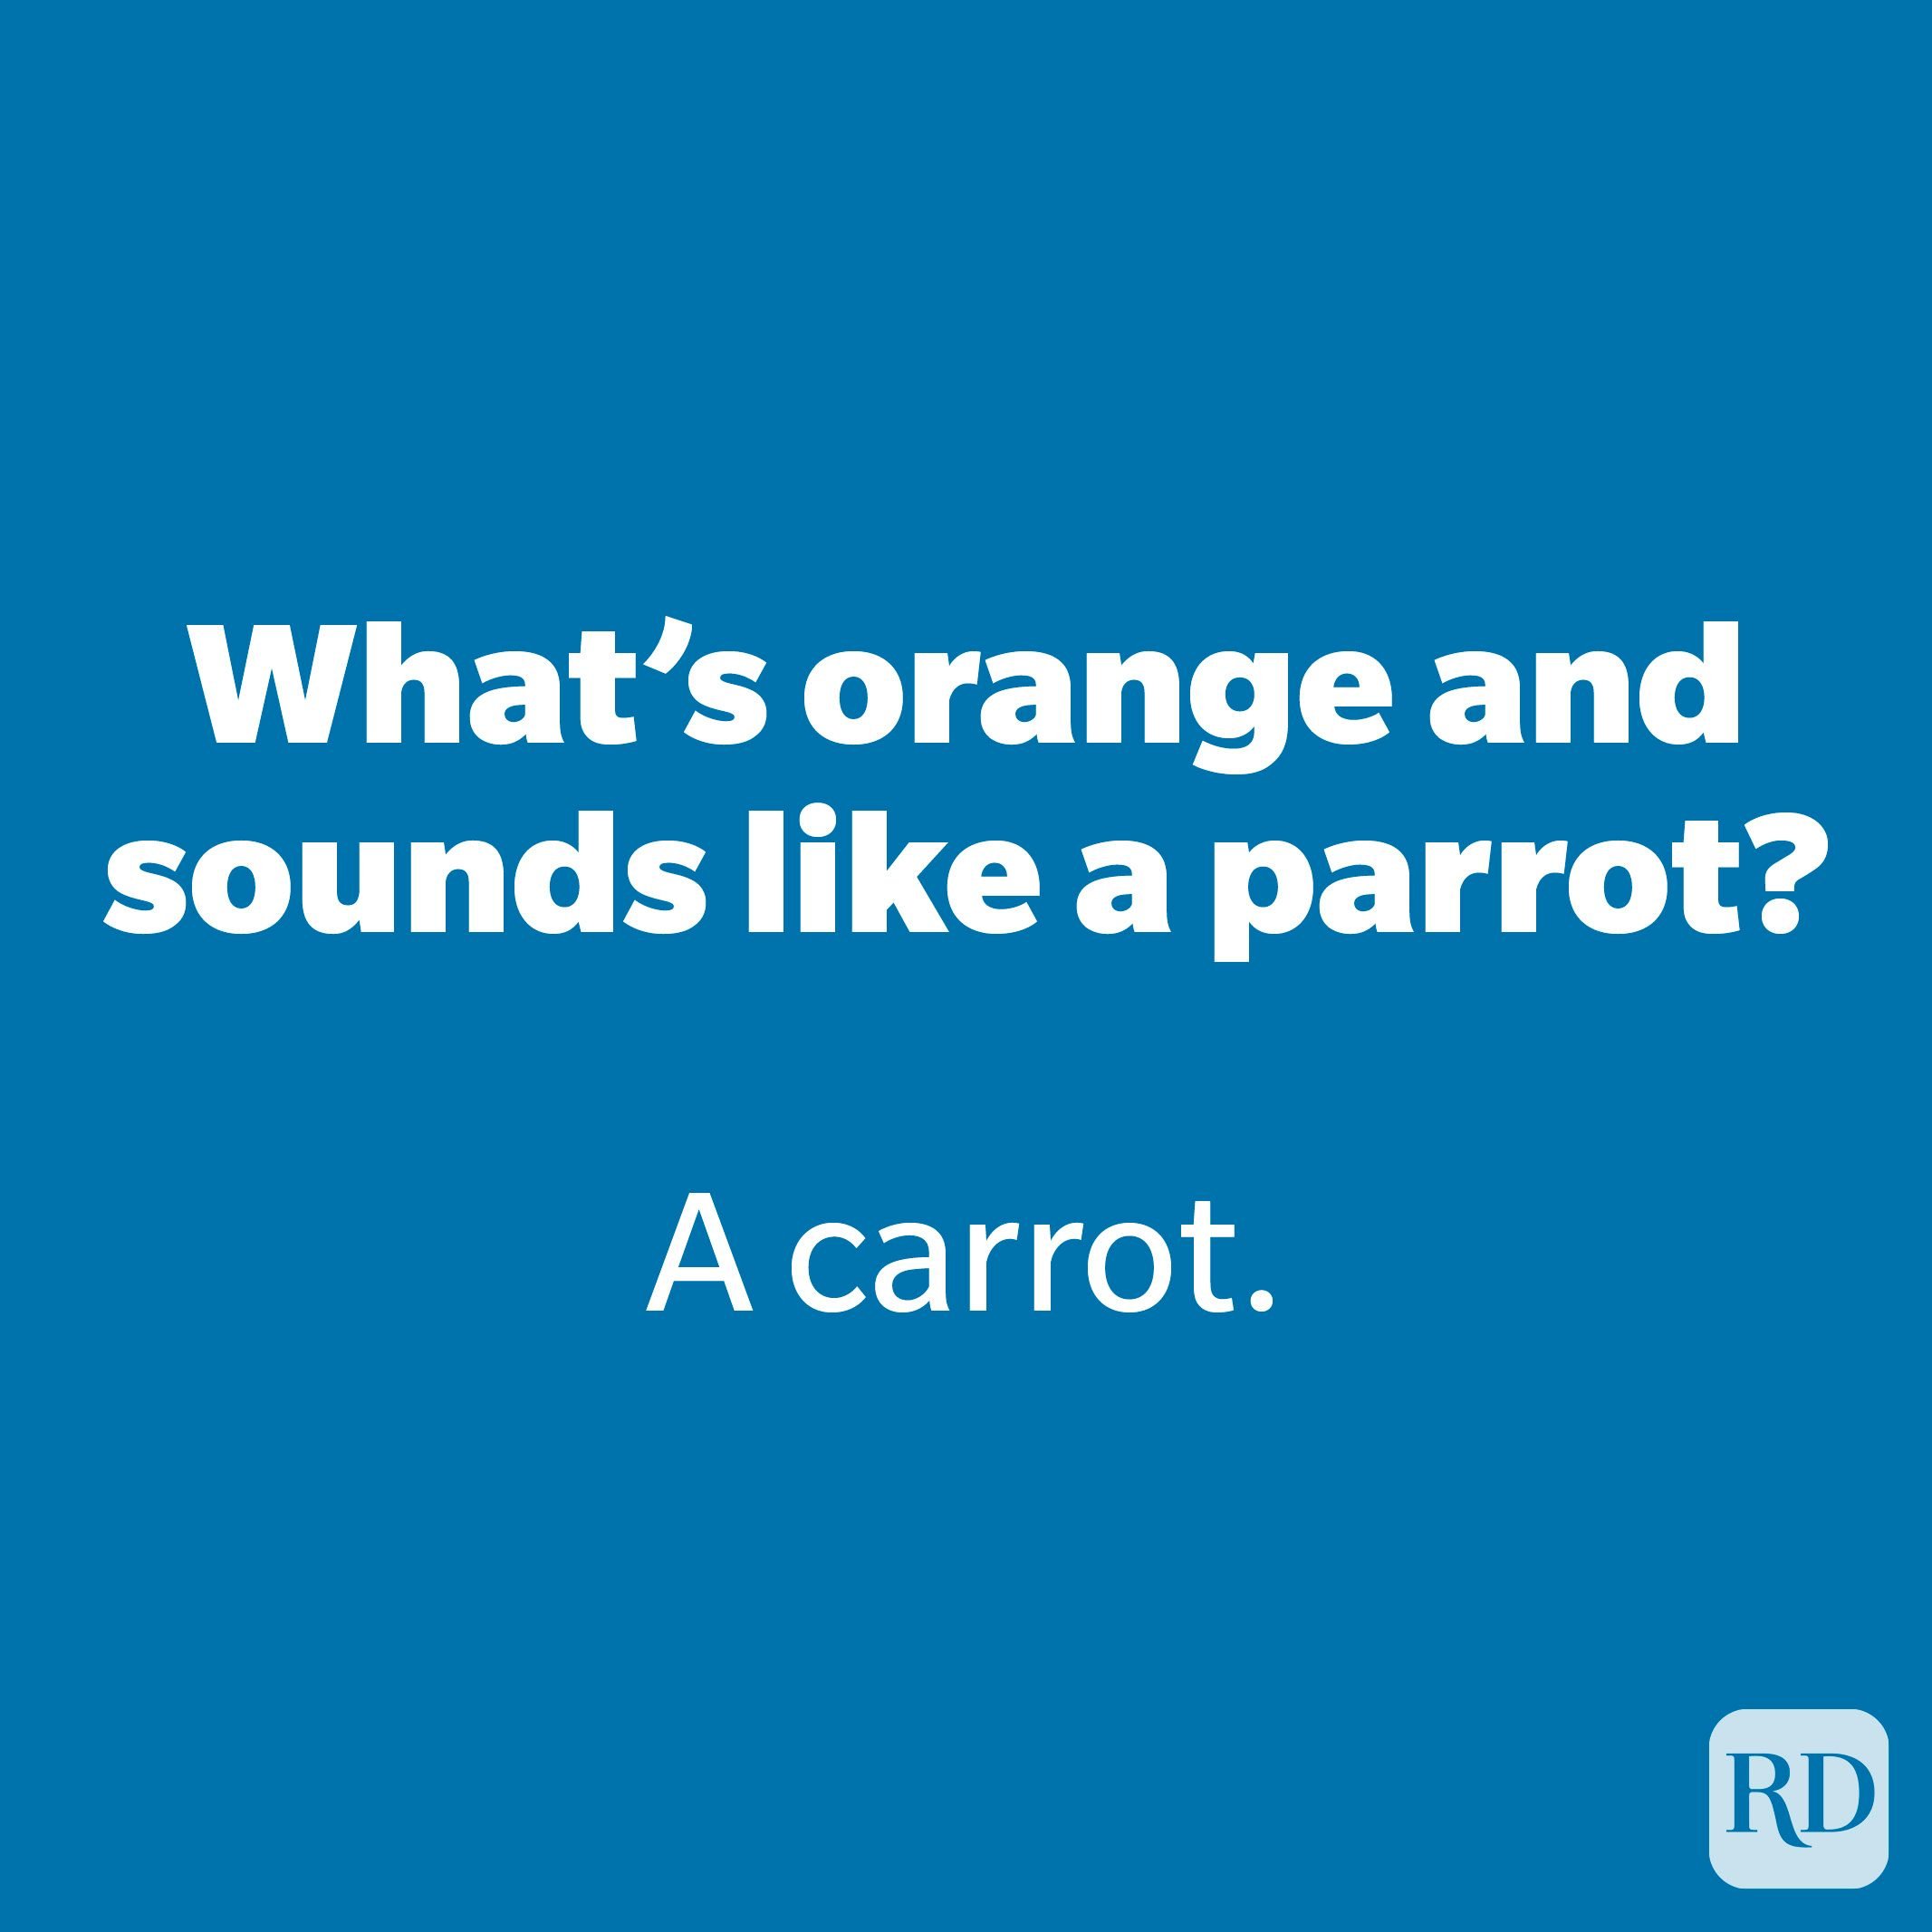 What’s orange and sounds like a parrot?